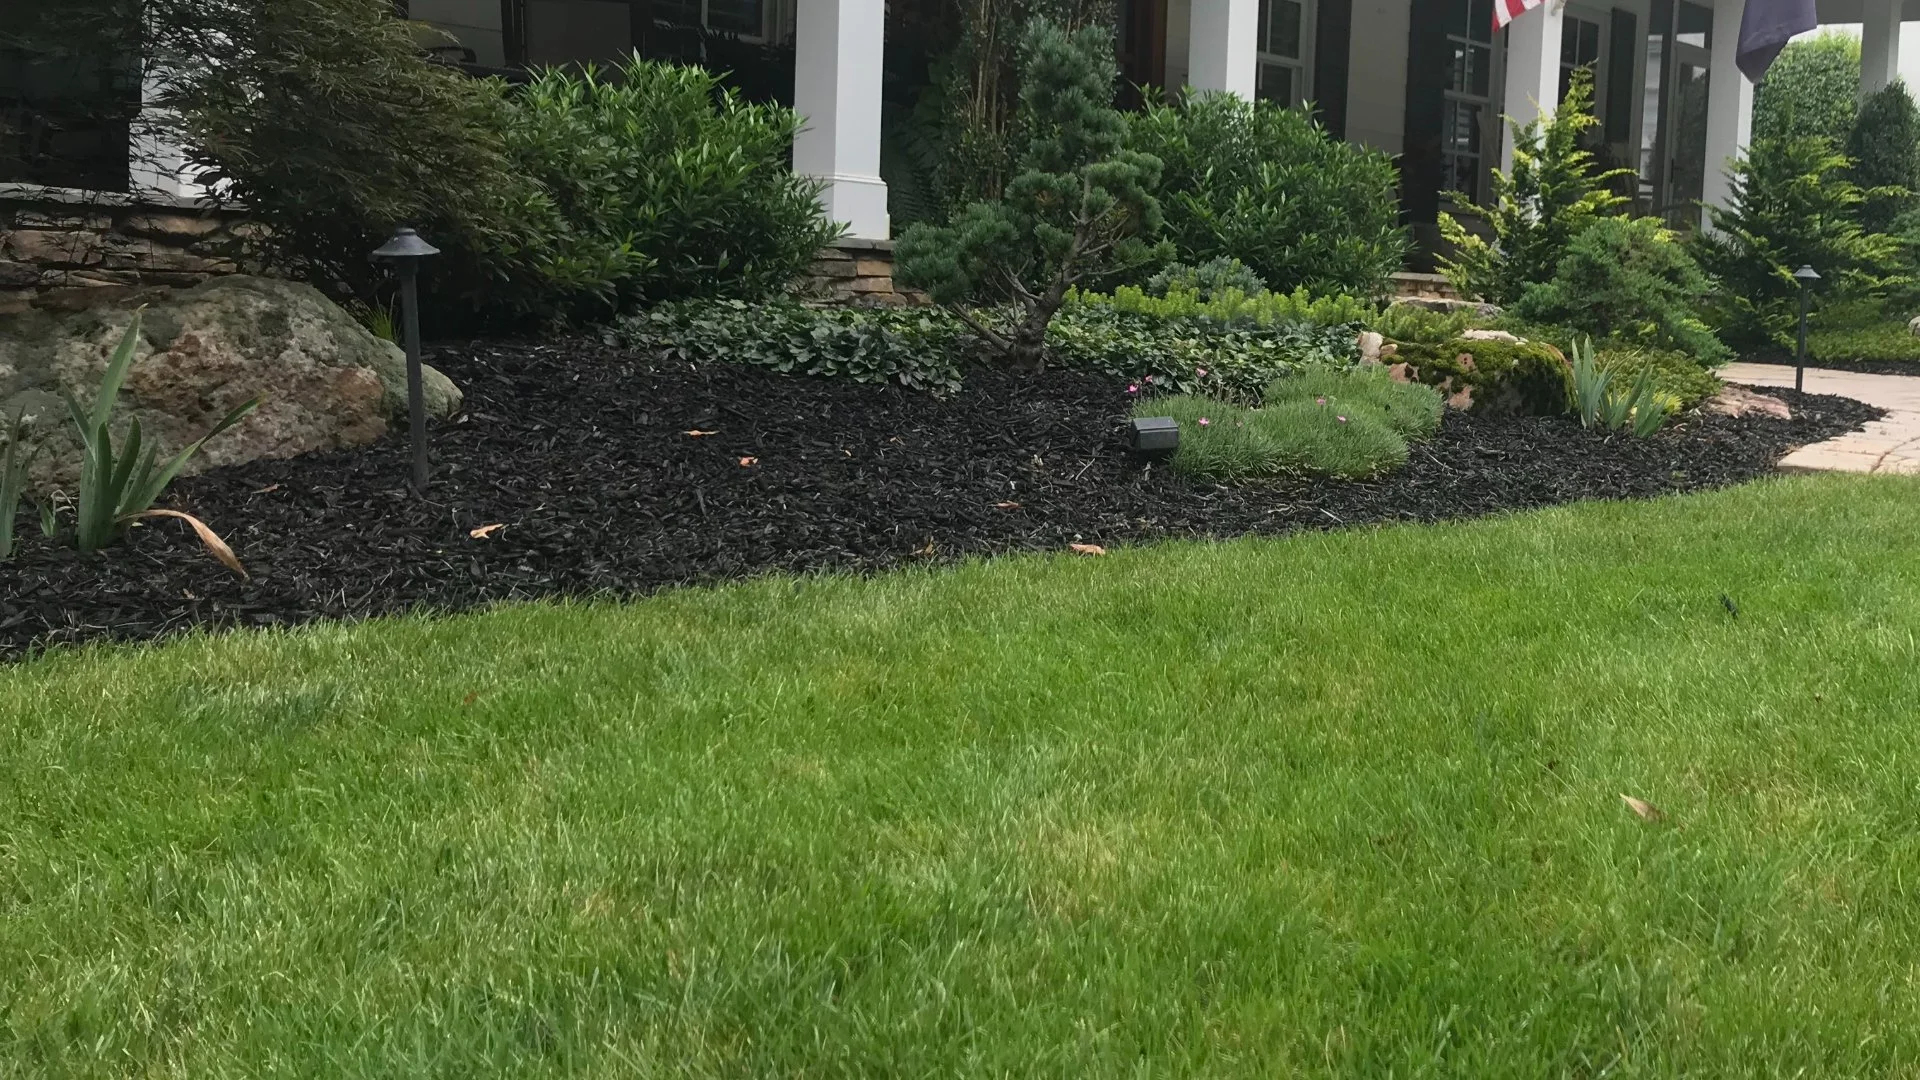 Should You Use a Mulch or Rock Ground Cover in Your Landscape Beds?